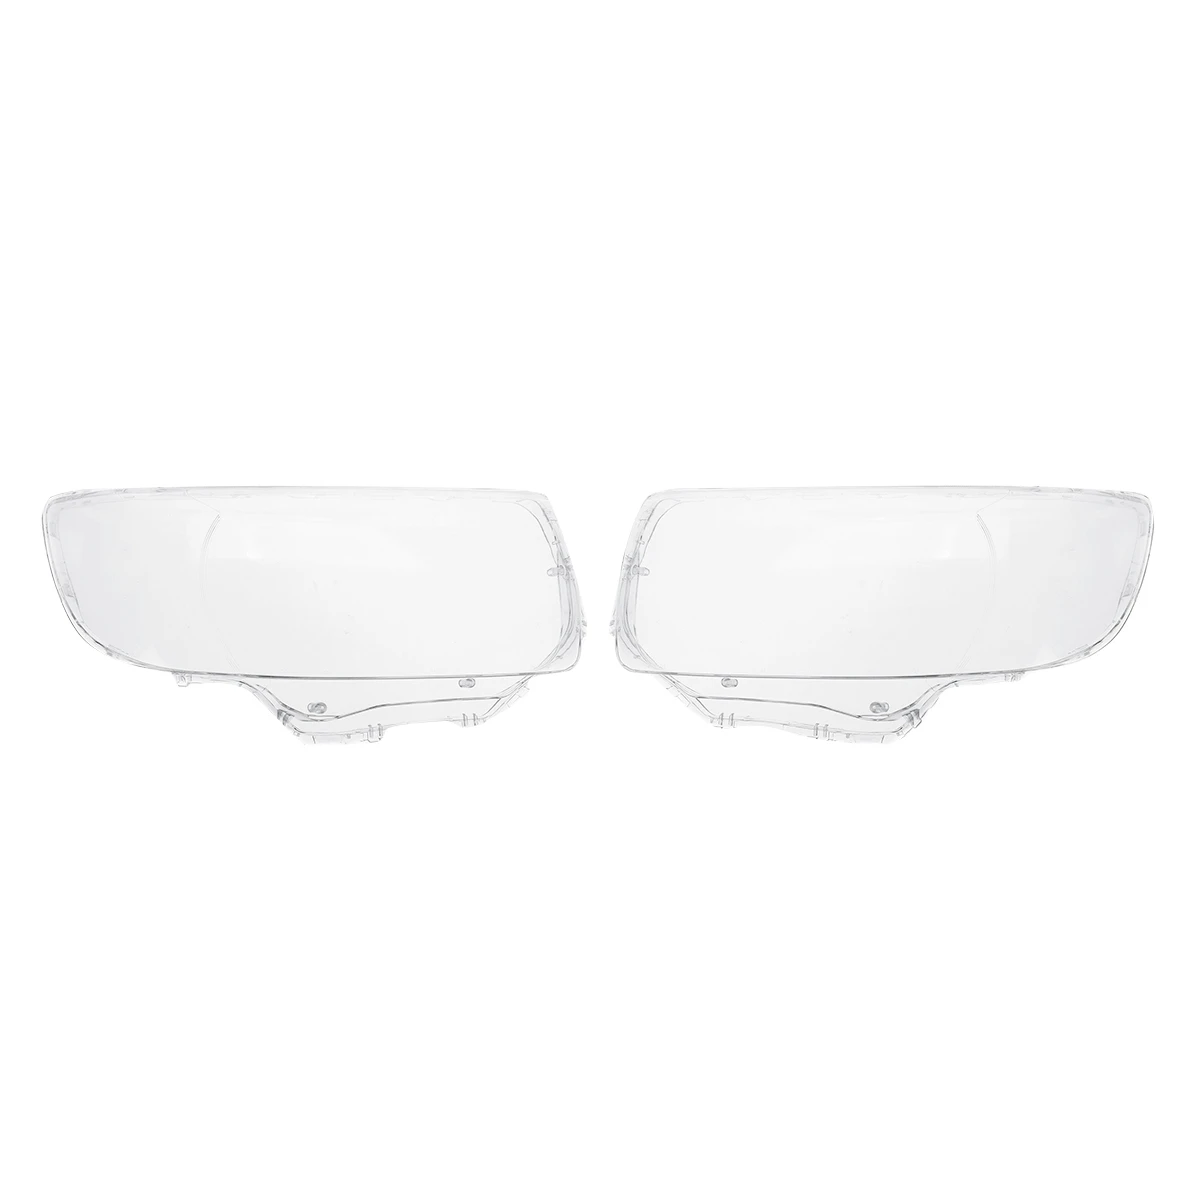 

1Pair Car Front Head Light Lamp Lens Cover Head Light Shell Lamp Hoods for Subaru Forester 2006-2008 SU2503119